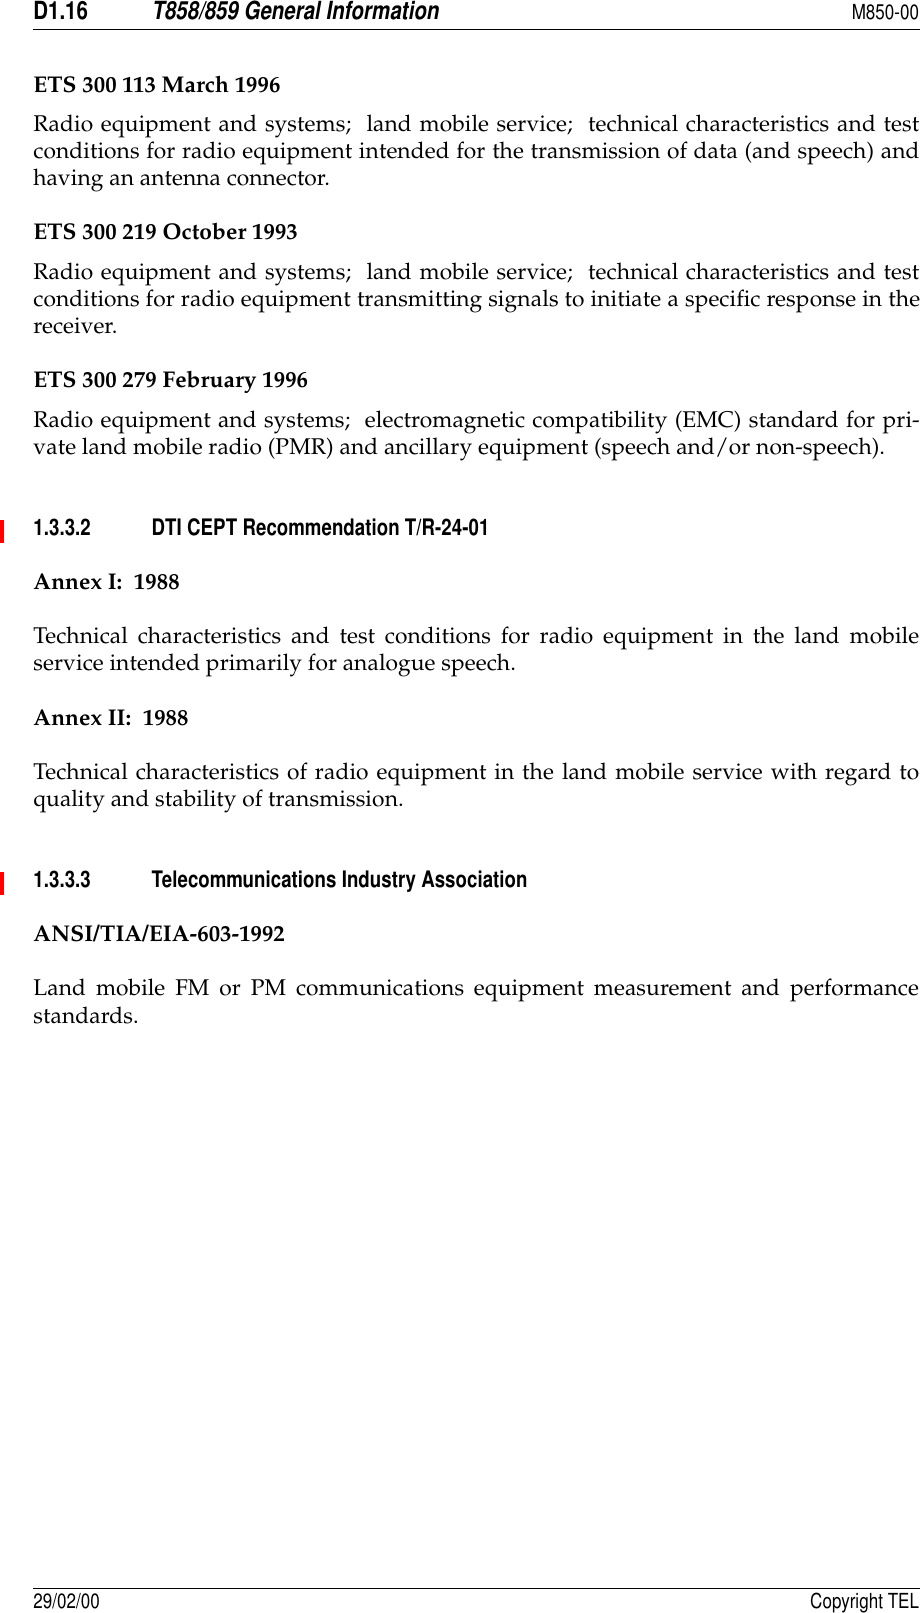 D1.16T858/859 General InformationM850-0029/02/00 Copyright TELETS 300 113 March 1996Radio equipment and systems;  land mobile service;  technical characteristics and testconditions for radio equipment intended for the transmission of data (and speech) andhaving an antenna connector.ETS 300 219 October 1993Radio equipment and systems;  land mobile service;  technical characteristics and testconditions for radio equipment transmitting signals to initiate a specific response in thereceiver.ETS 300 279 February 1996Radio equipment and systems;  electromagnetic compatibility (EMC) standard for pri-vate land mobile radio (PMR) and ancillary equipment (speech and/or non-speech).1.3.3.2 DTI CEPT Recommendation T/R-24-01Annex I:  1988Technical characteristics and test conditions for radio equipment in the land mobileservice intended primarily for analogue speech.Annex II:  1988Technical characteristics of radio equipment in the land mobile service with regard toquality and stability of transmission.1.3.3.3 Telecommunications Industry AssociationANSI/TIA/EIA-603-1992Land mobile FM or PM communications equipment measurement and performancestandards.